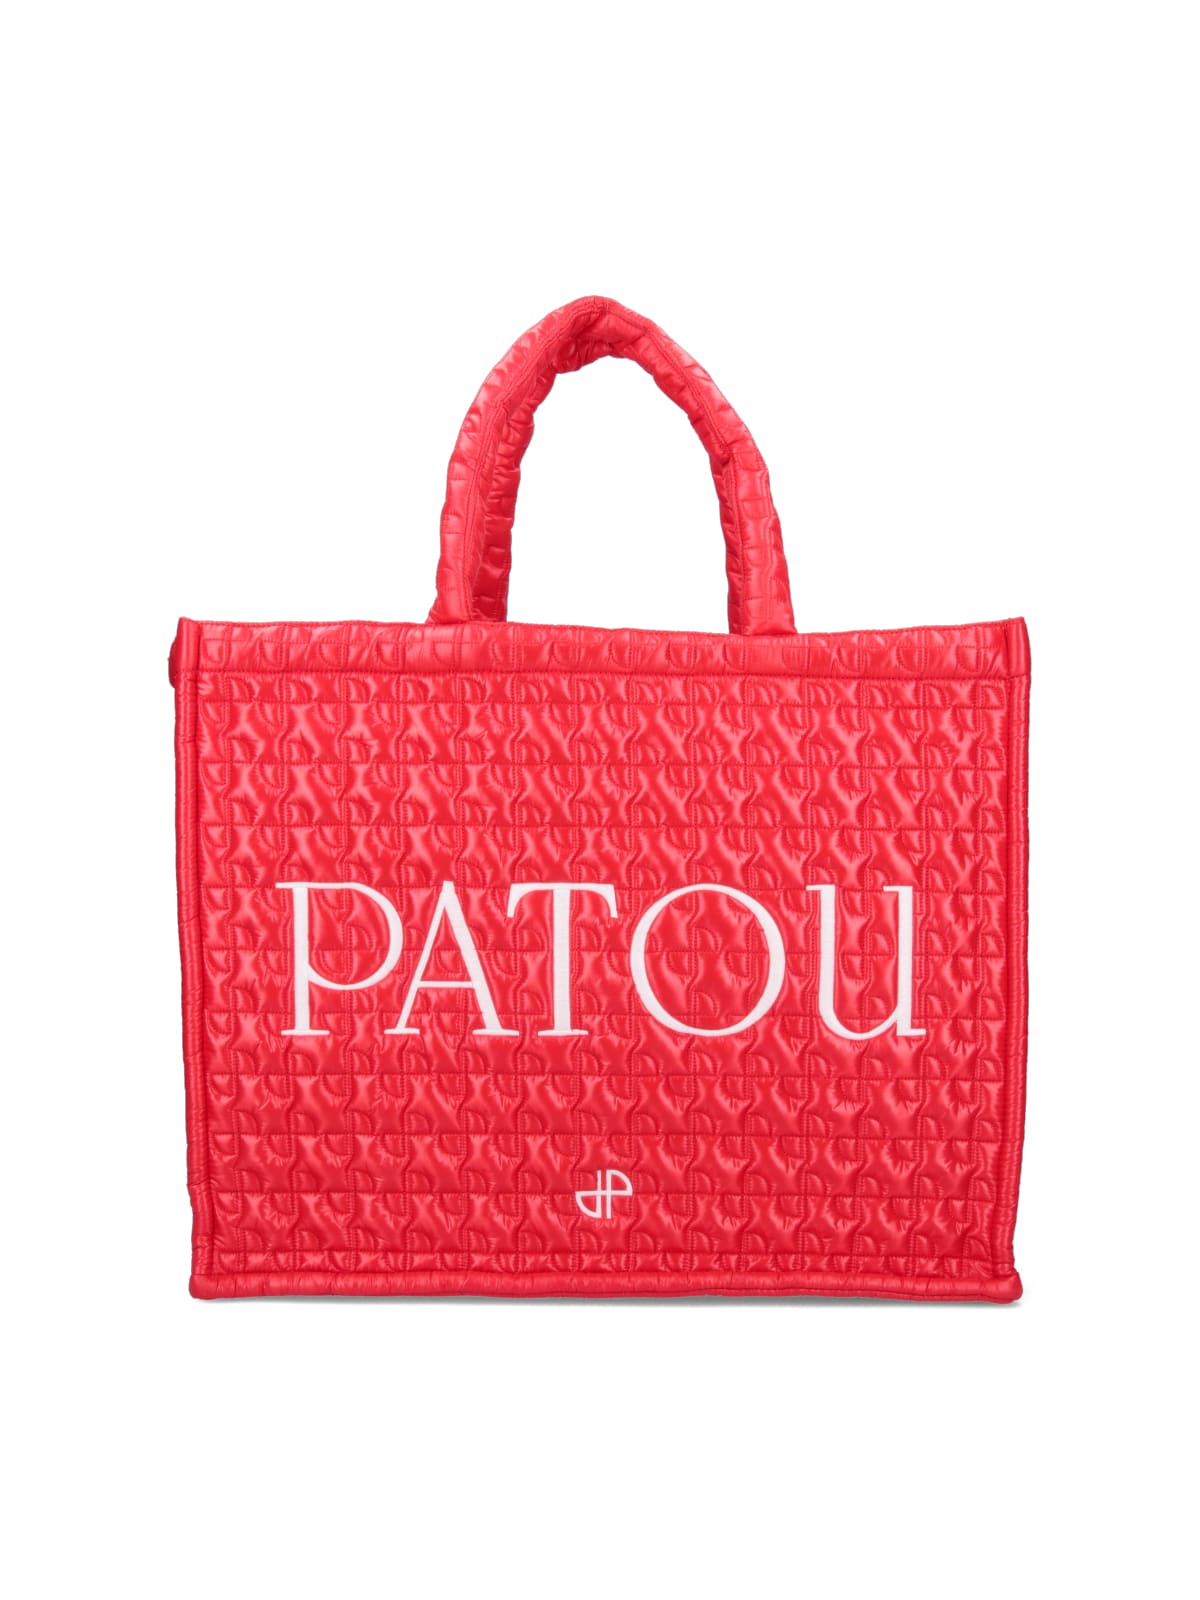 Patou Tote In Red